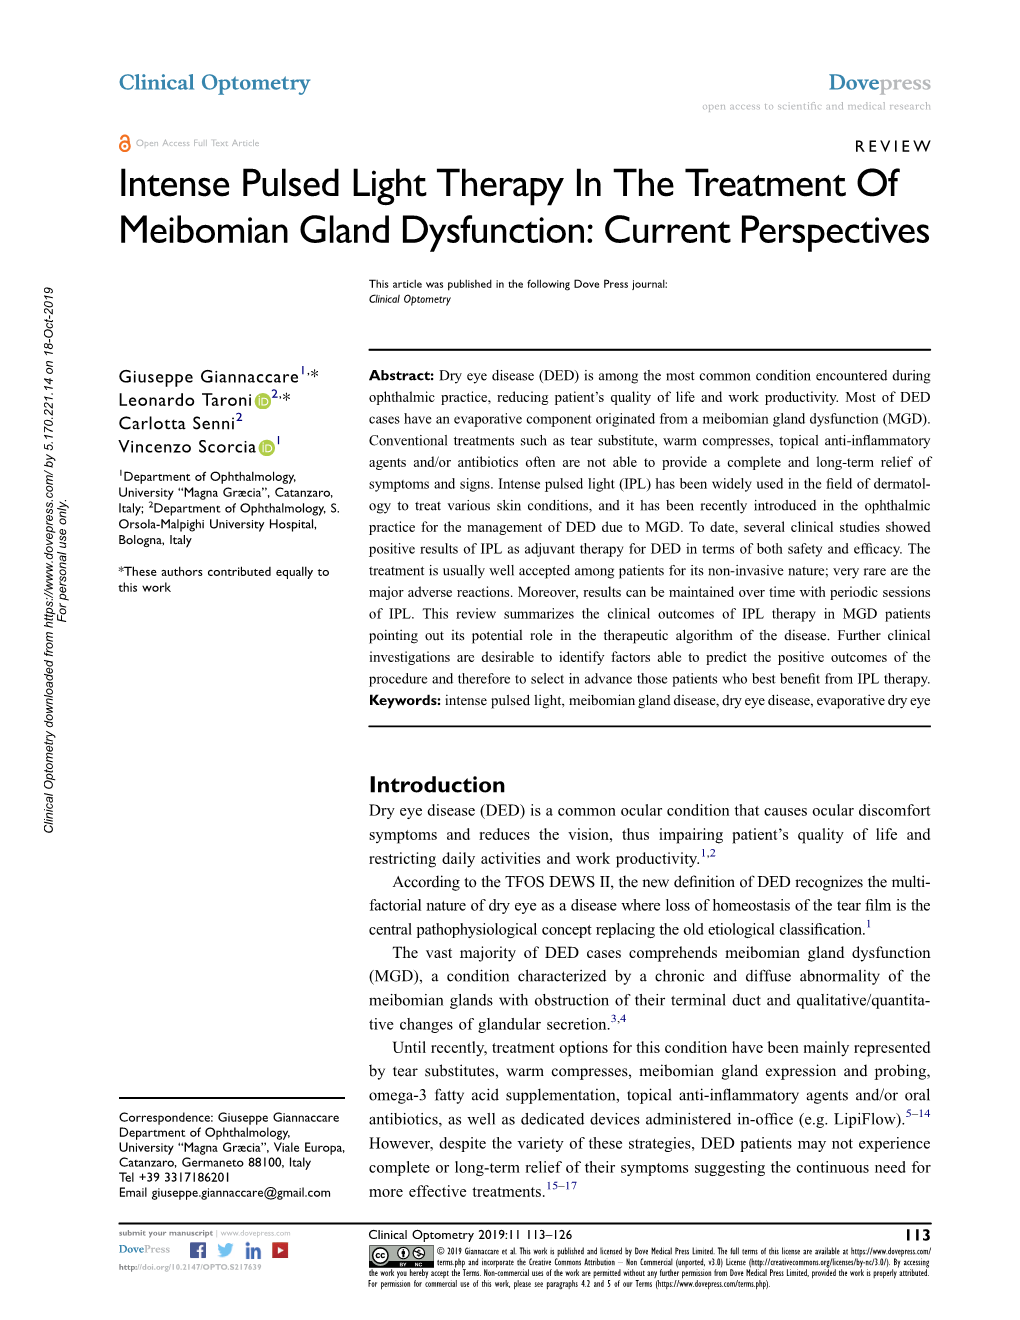 Intense Pulsed Light Therapy in the Treatment of Meibomian Gland Dysfunction: Current Perspectives